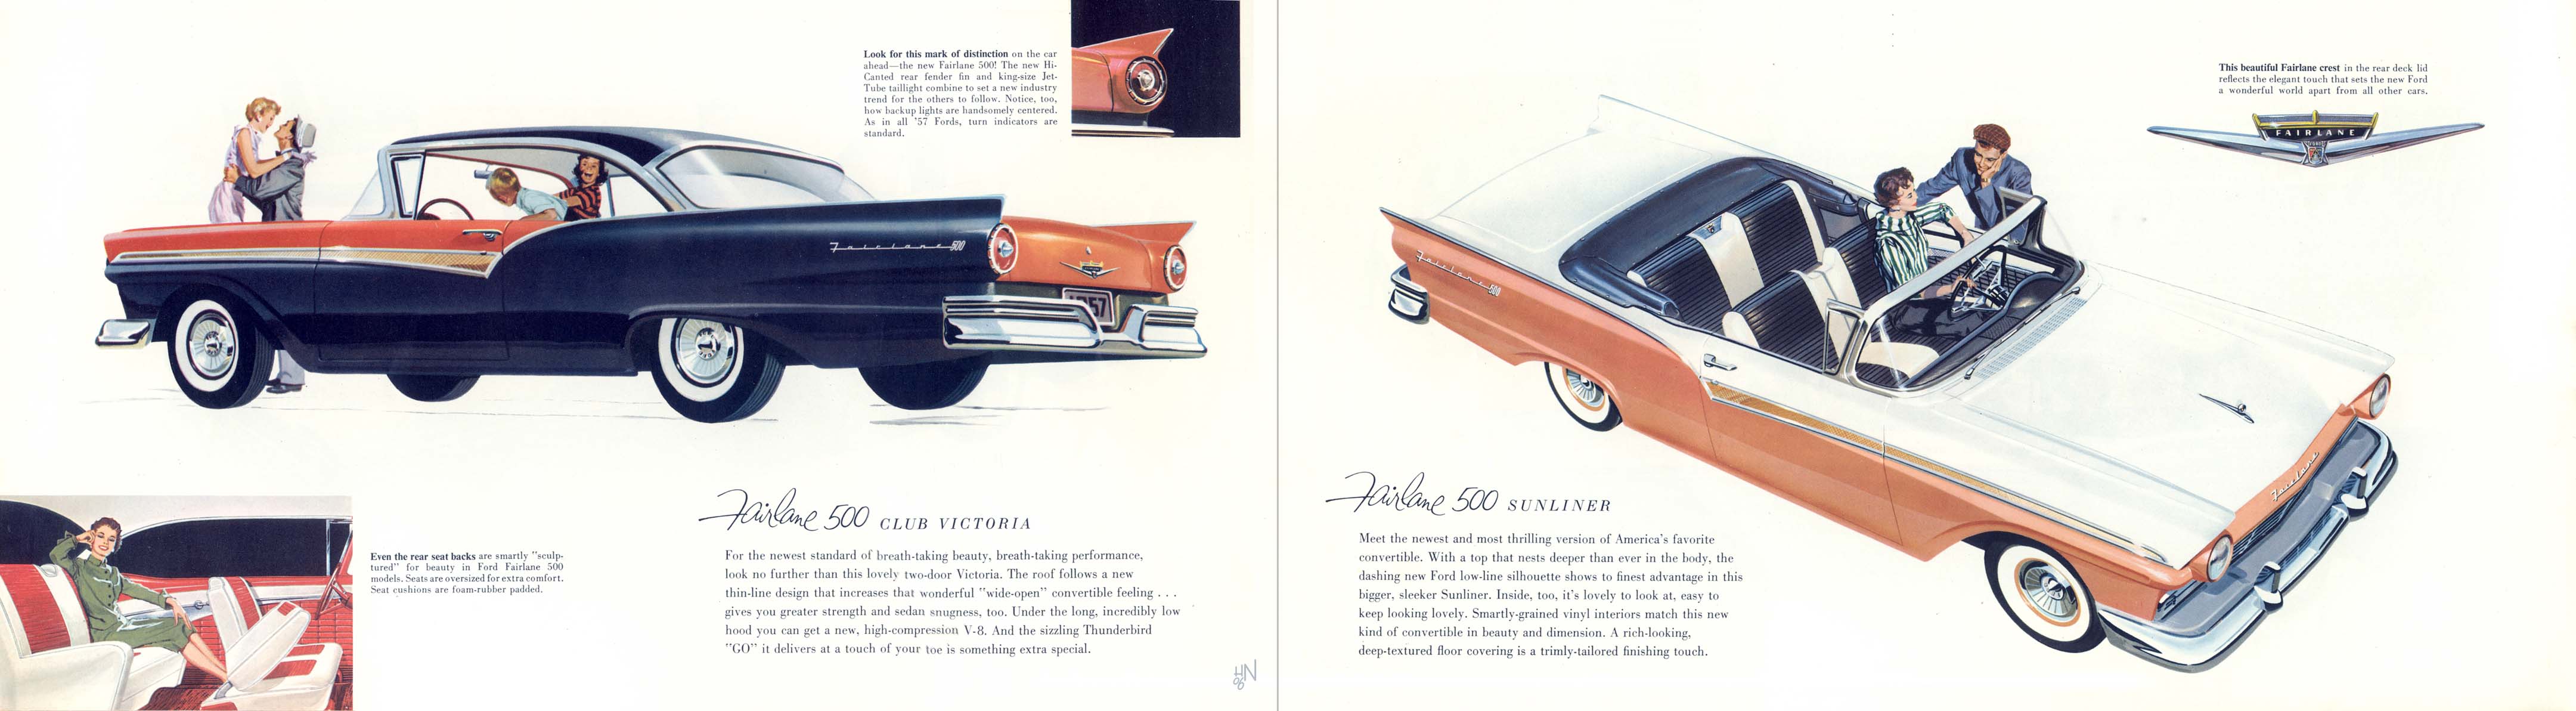 1957 Ford Fairlane Brochure Page 8